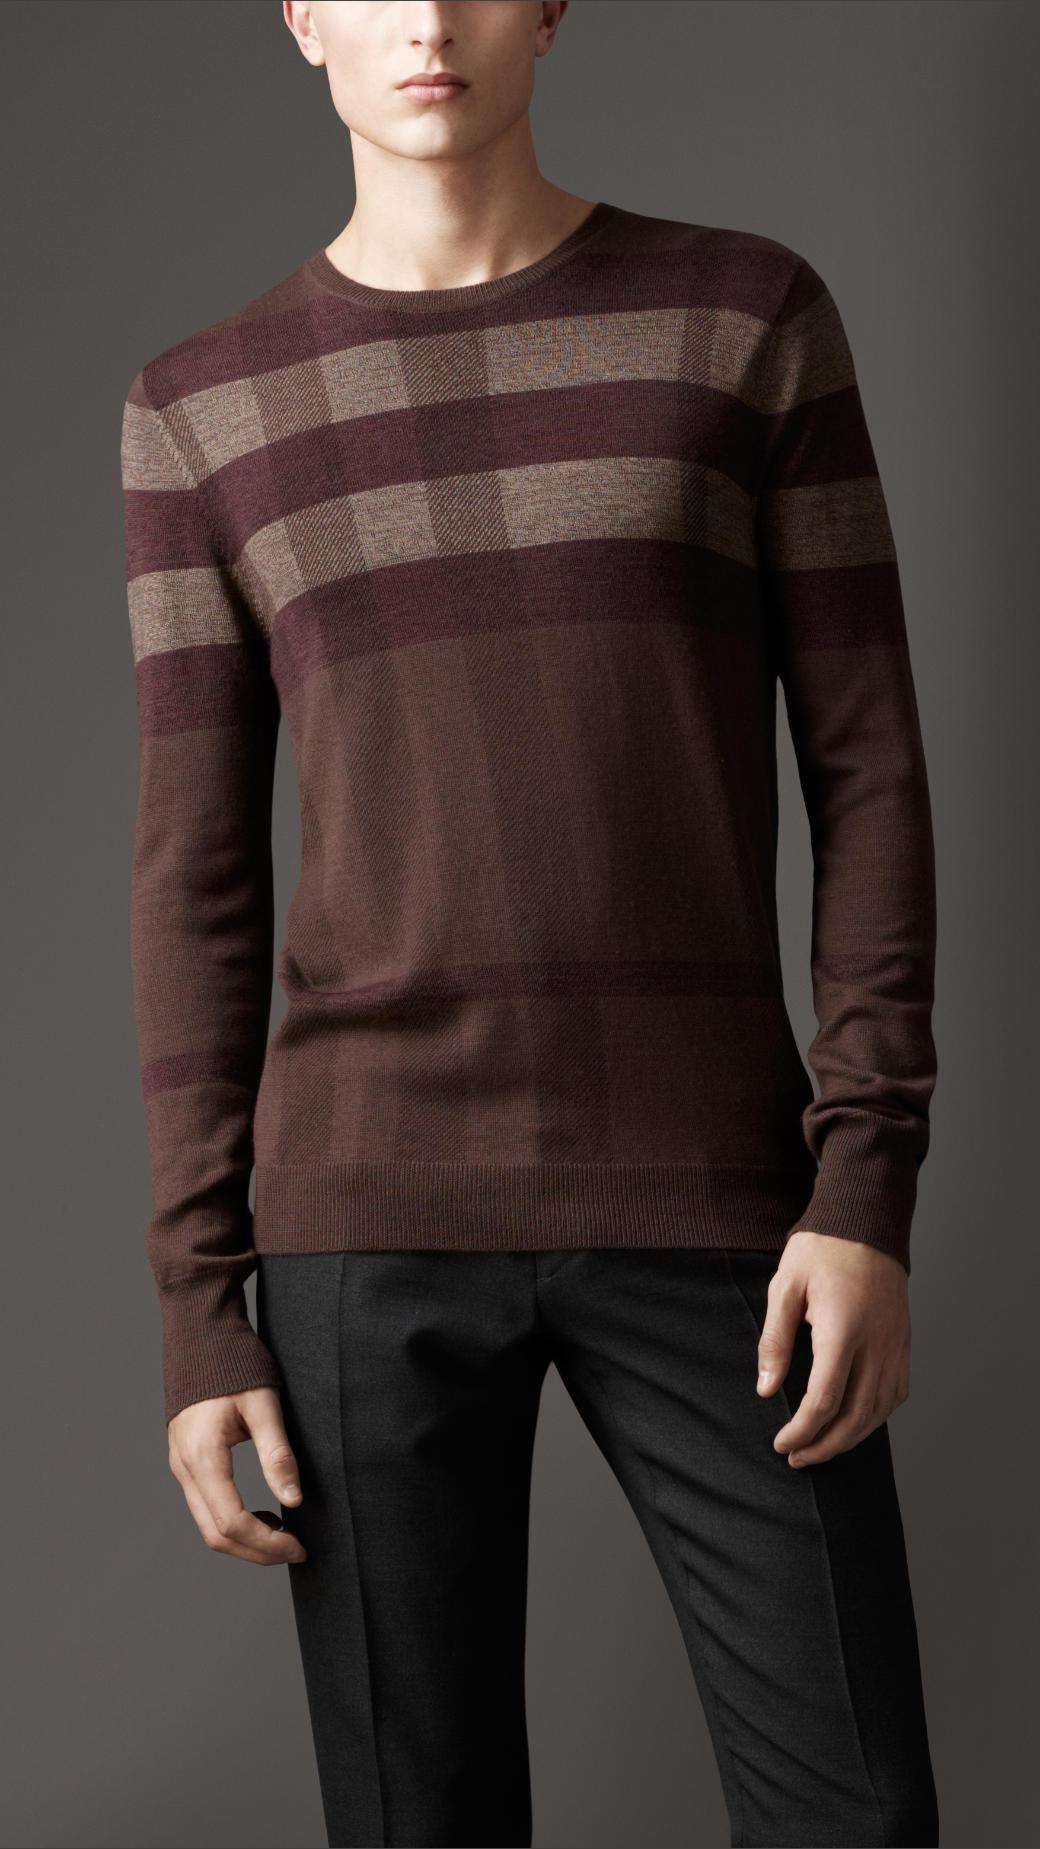 Burberry Check Wool Silk Sweater in Brown for Men - Lyst